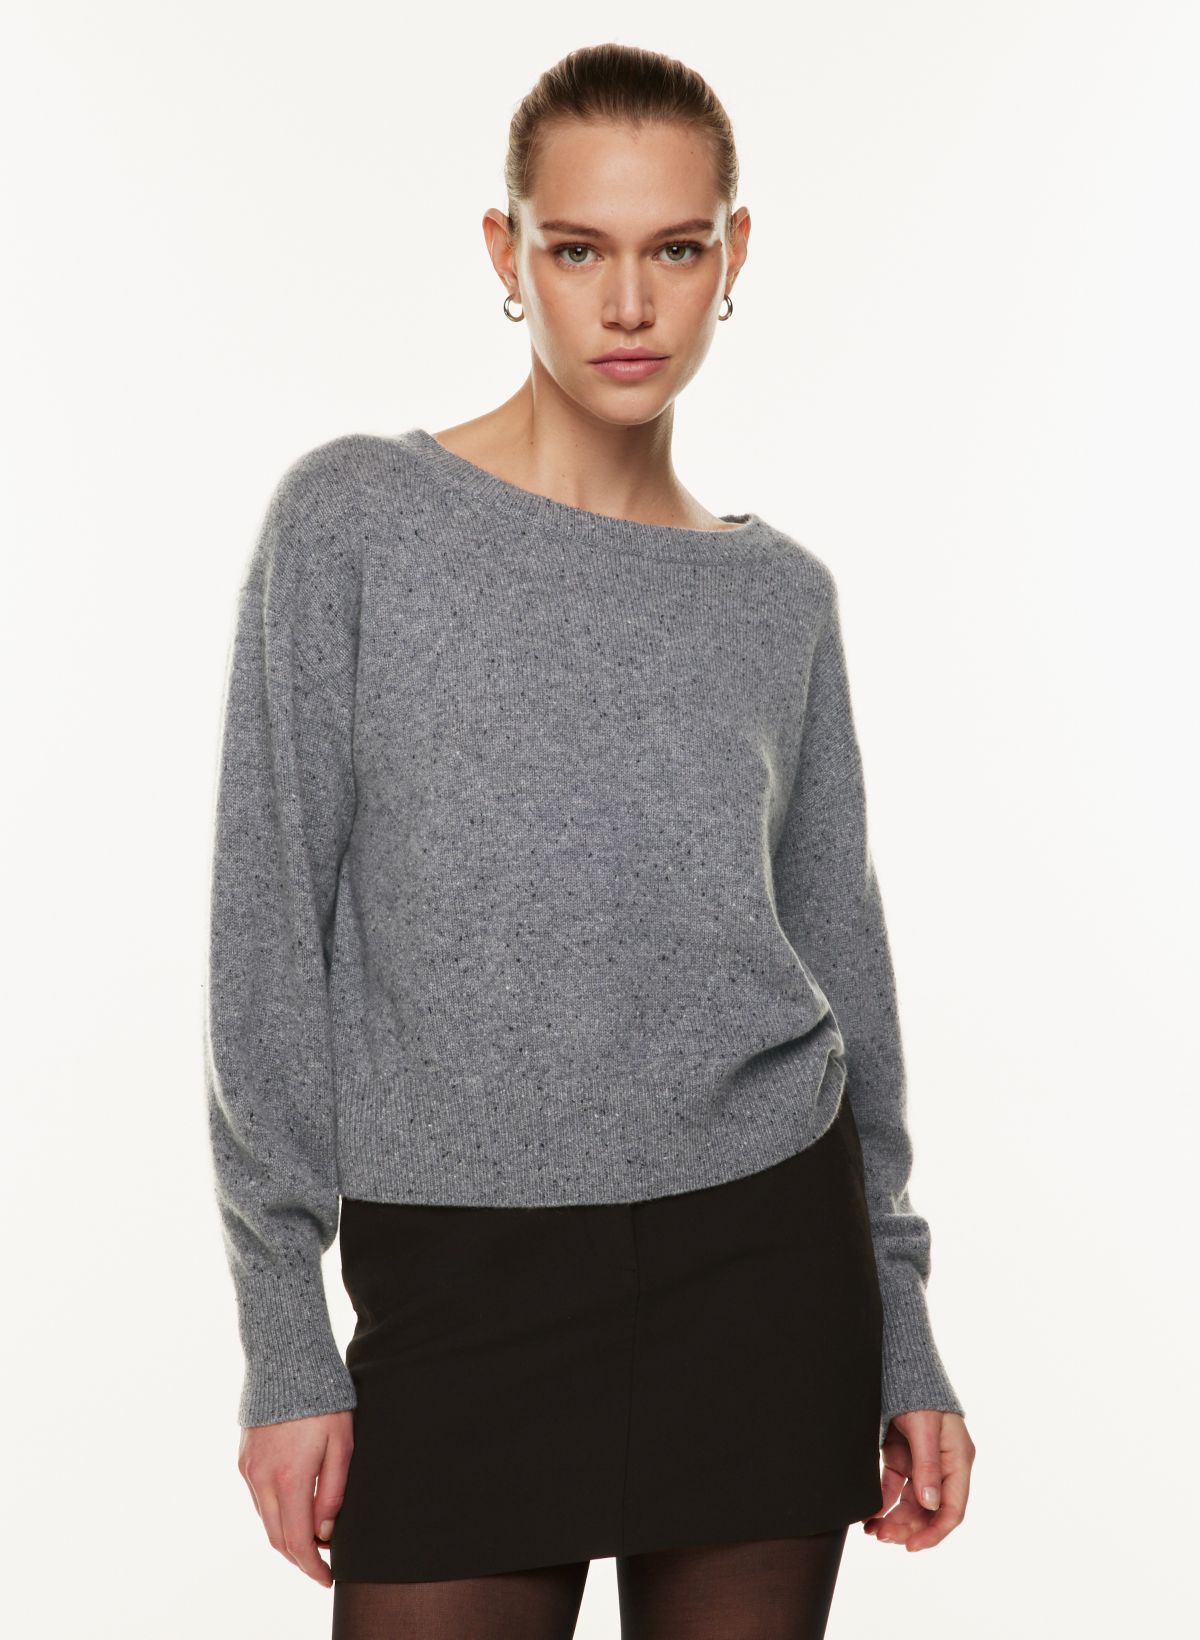 Katie Boat Neck Cropped Sweater